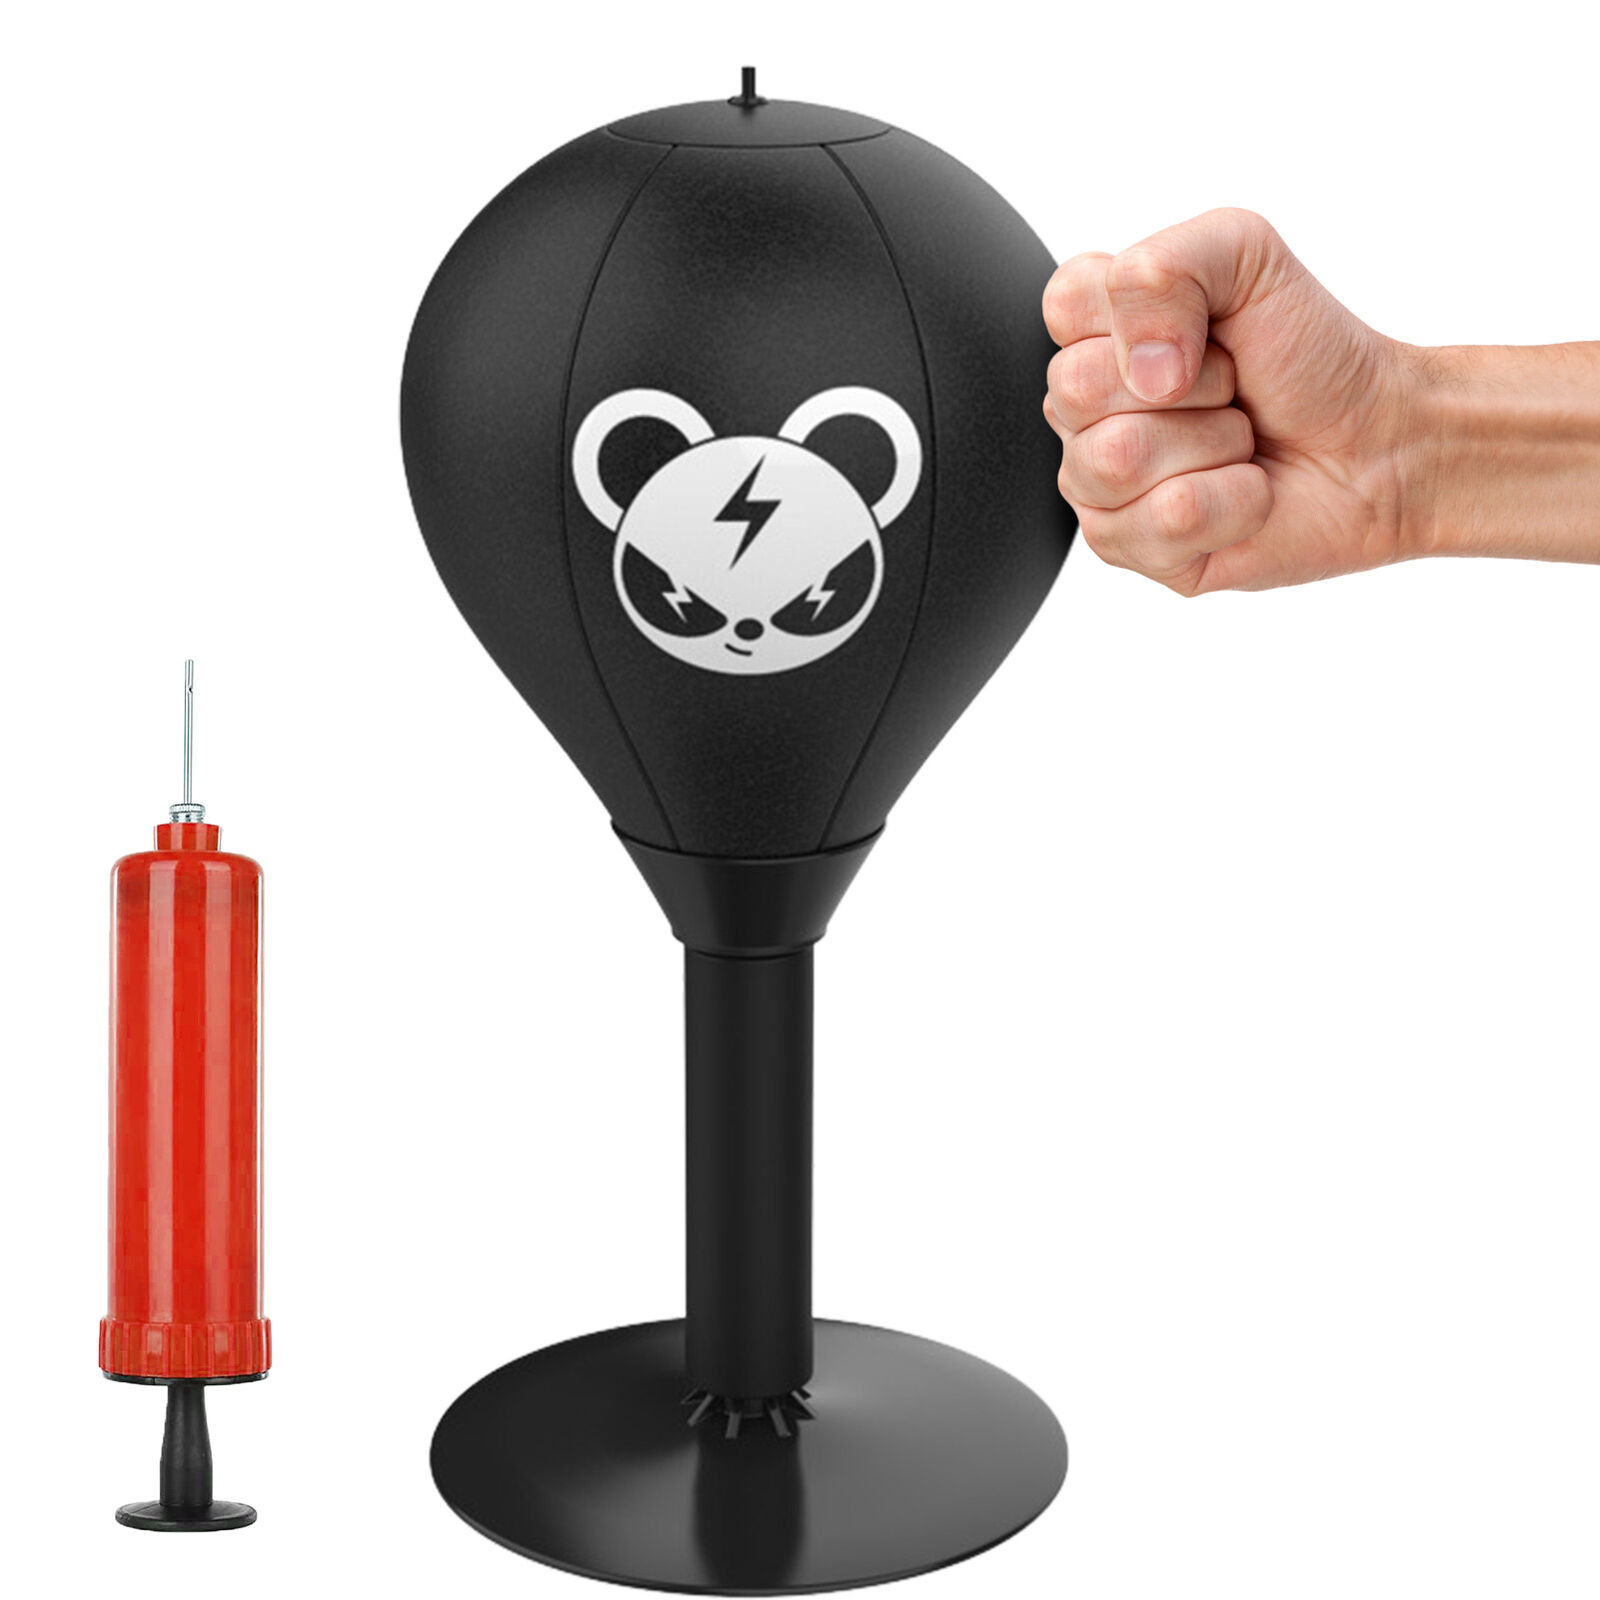 Novelty Mini Desktop Punching Bag With Suction Cup Base Stress Buster